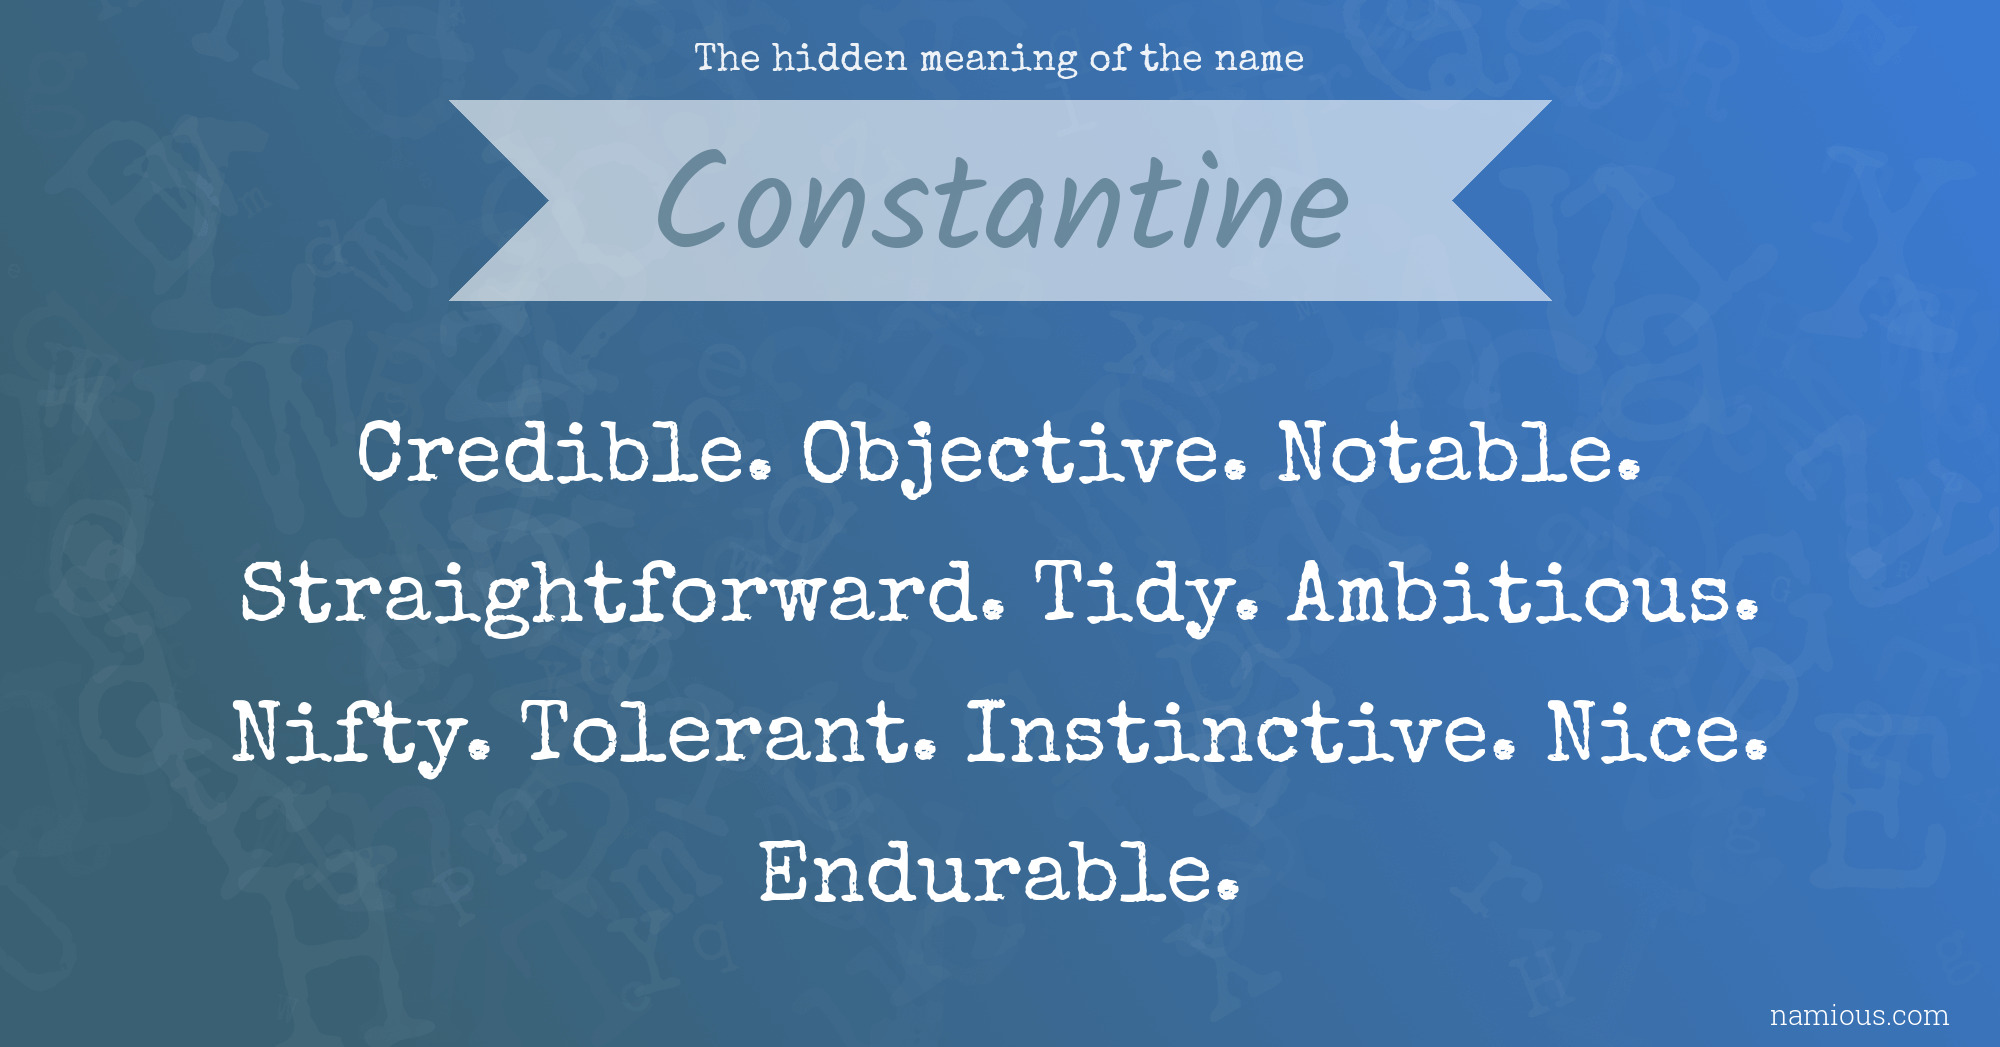 The hidden meaning of the name Constantine